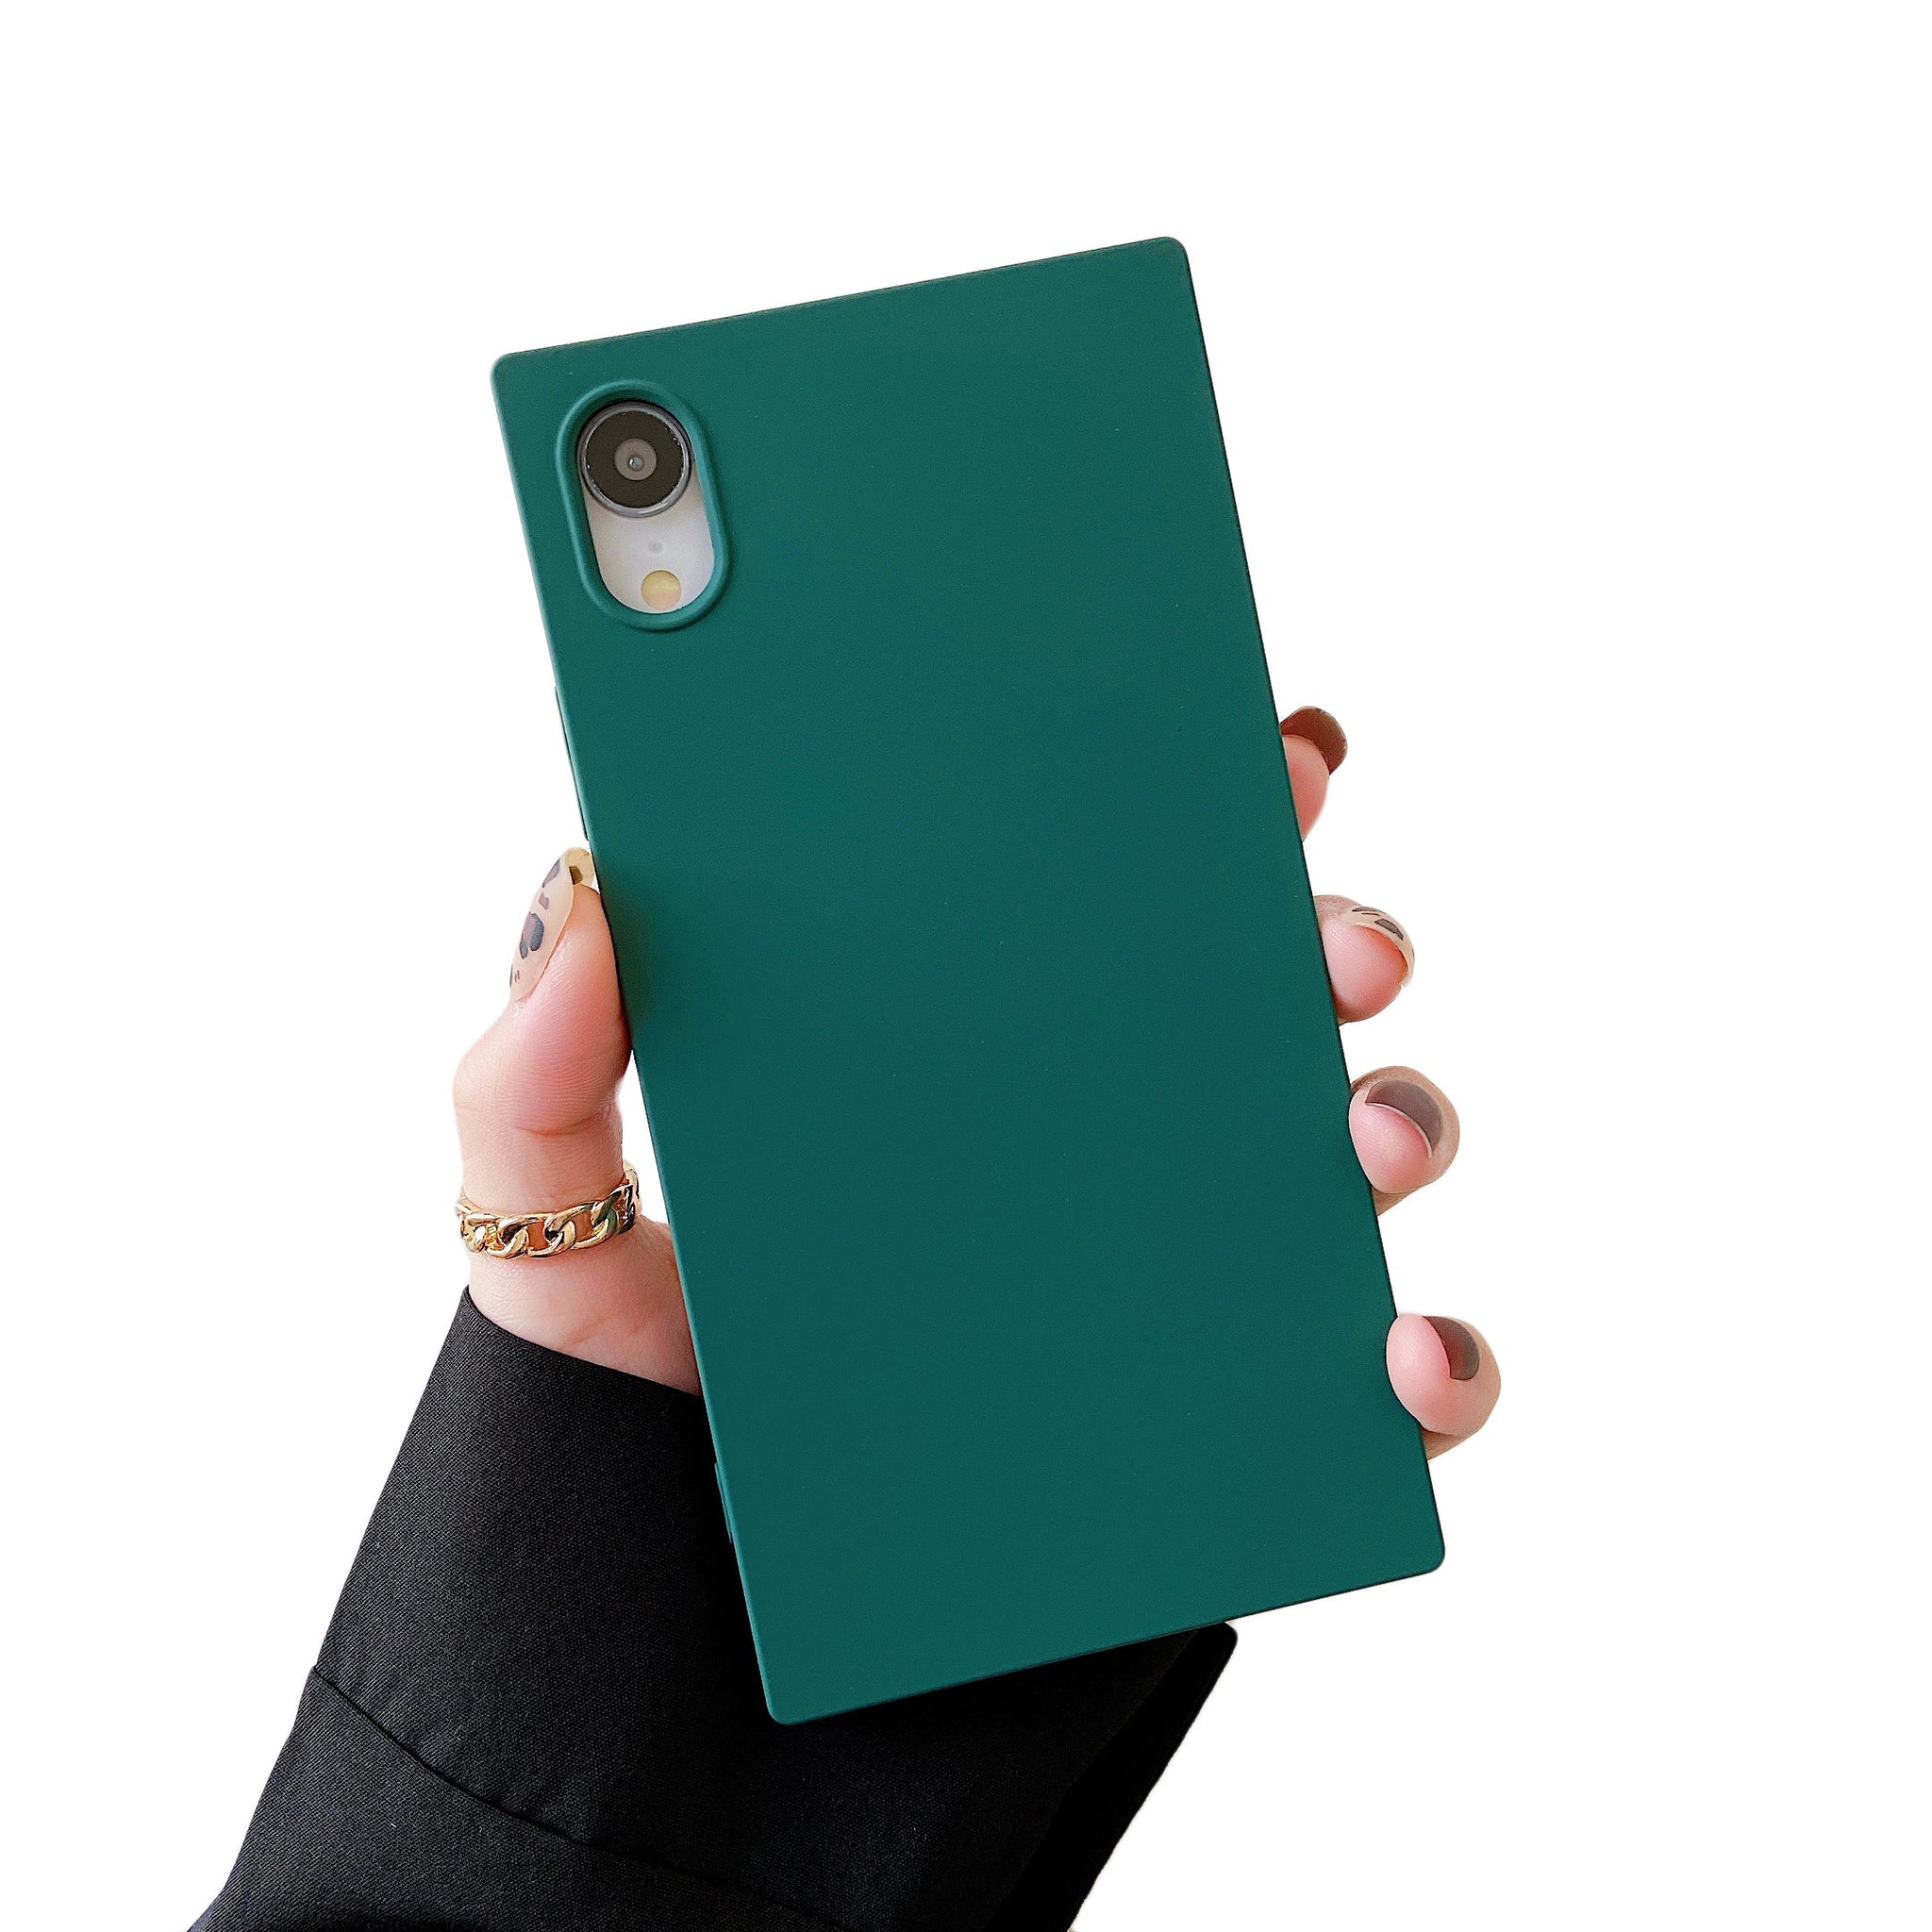 iPhone XR Case Square Silicone (Clover Green)